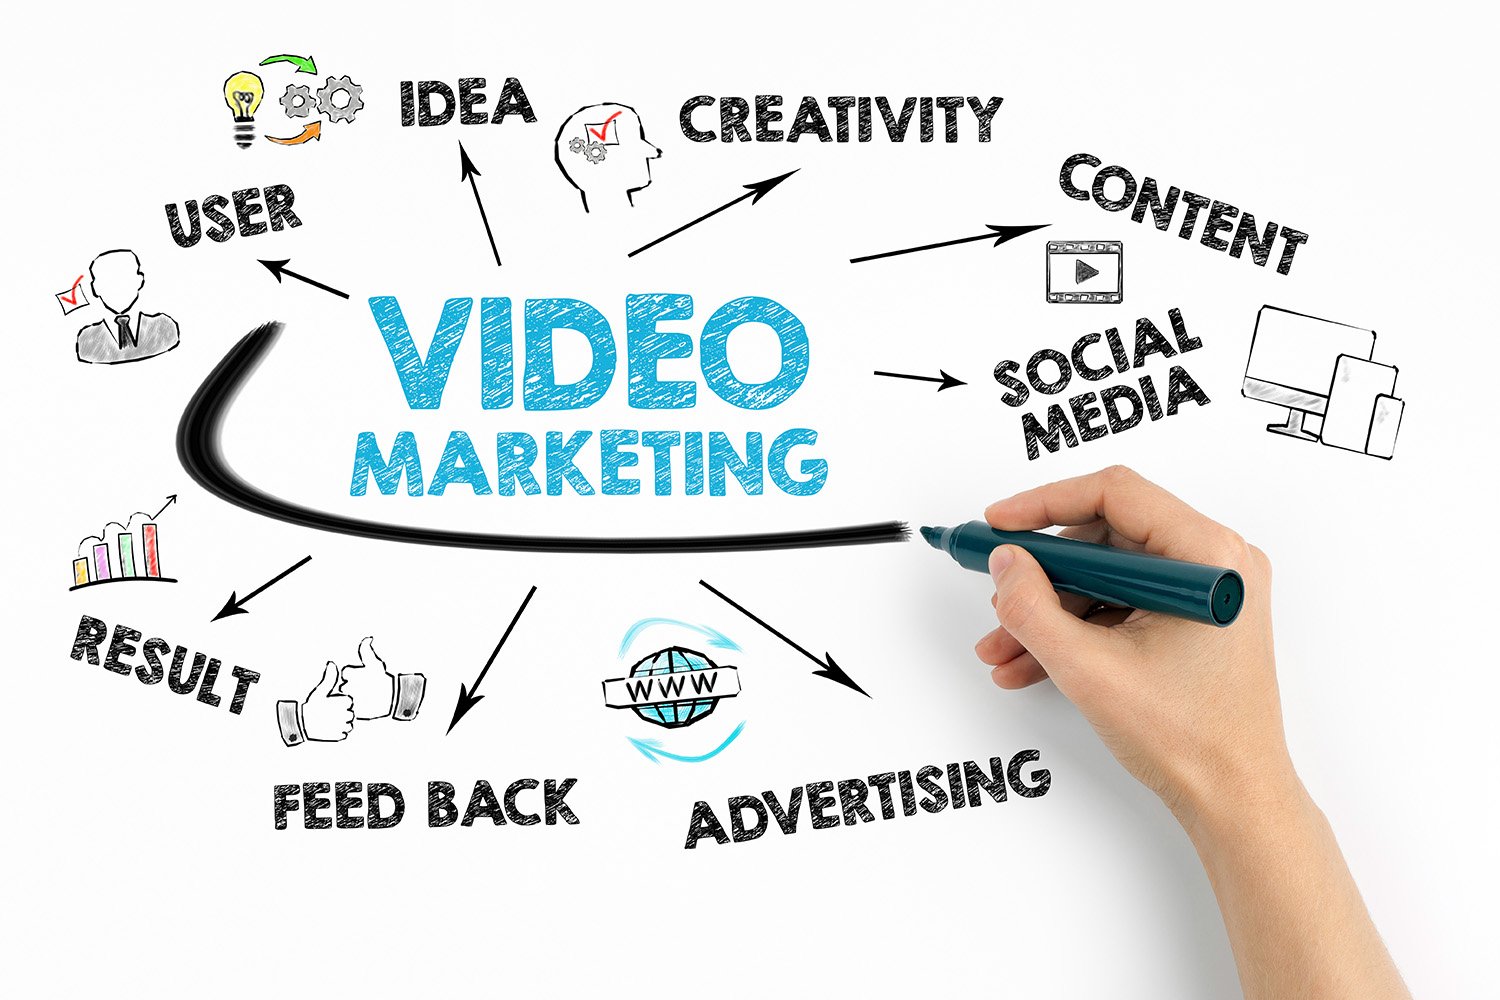 Tips for Effective Video Marketing – The Importance of Video in Dallas Marketing